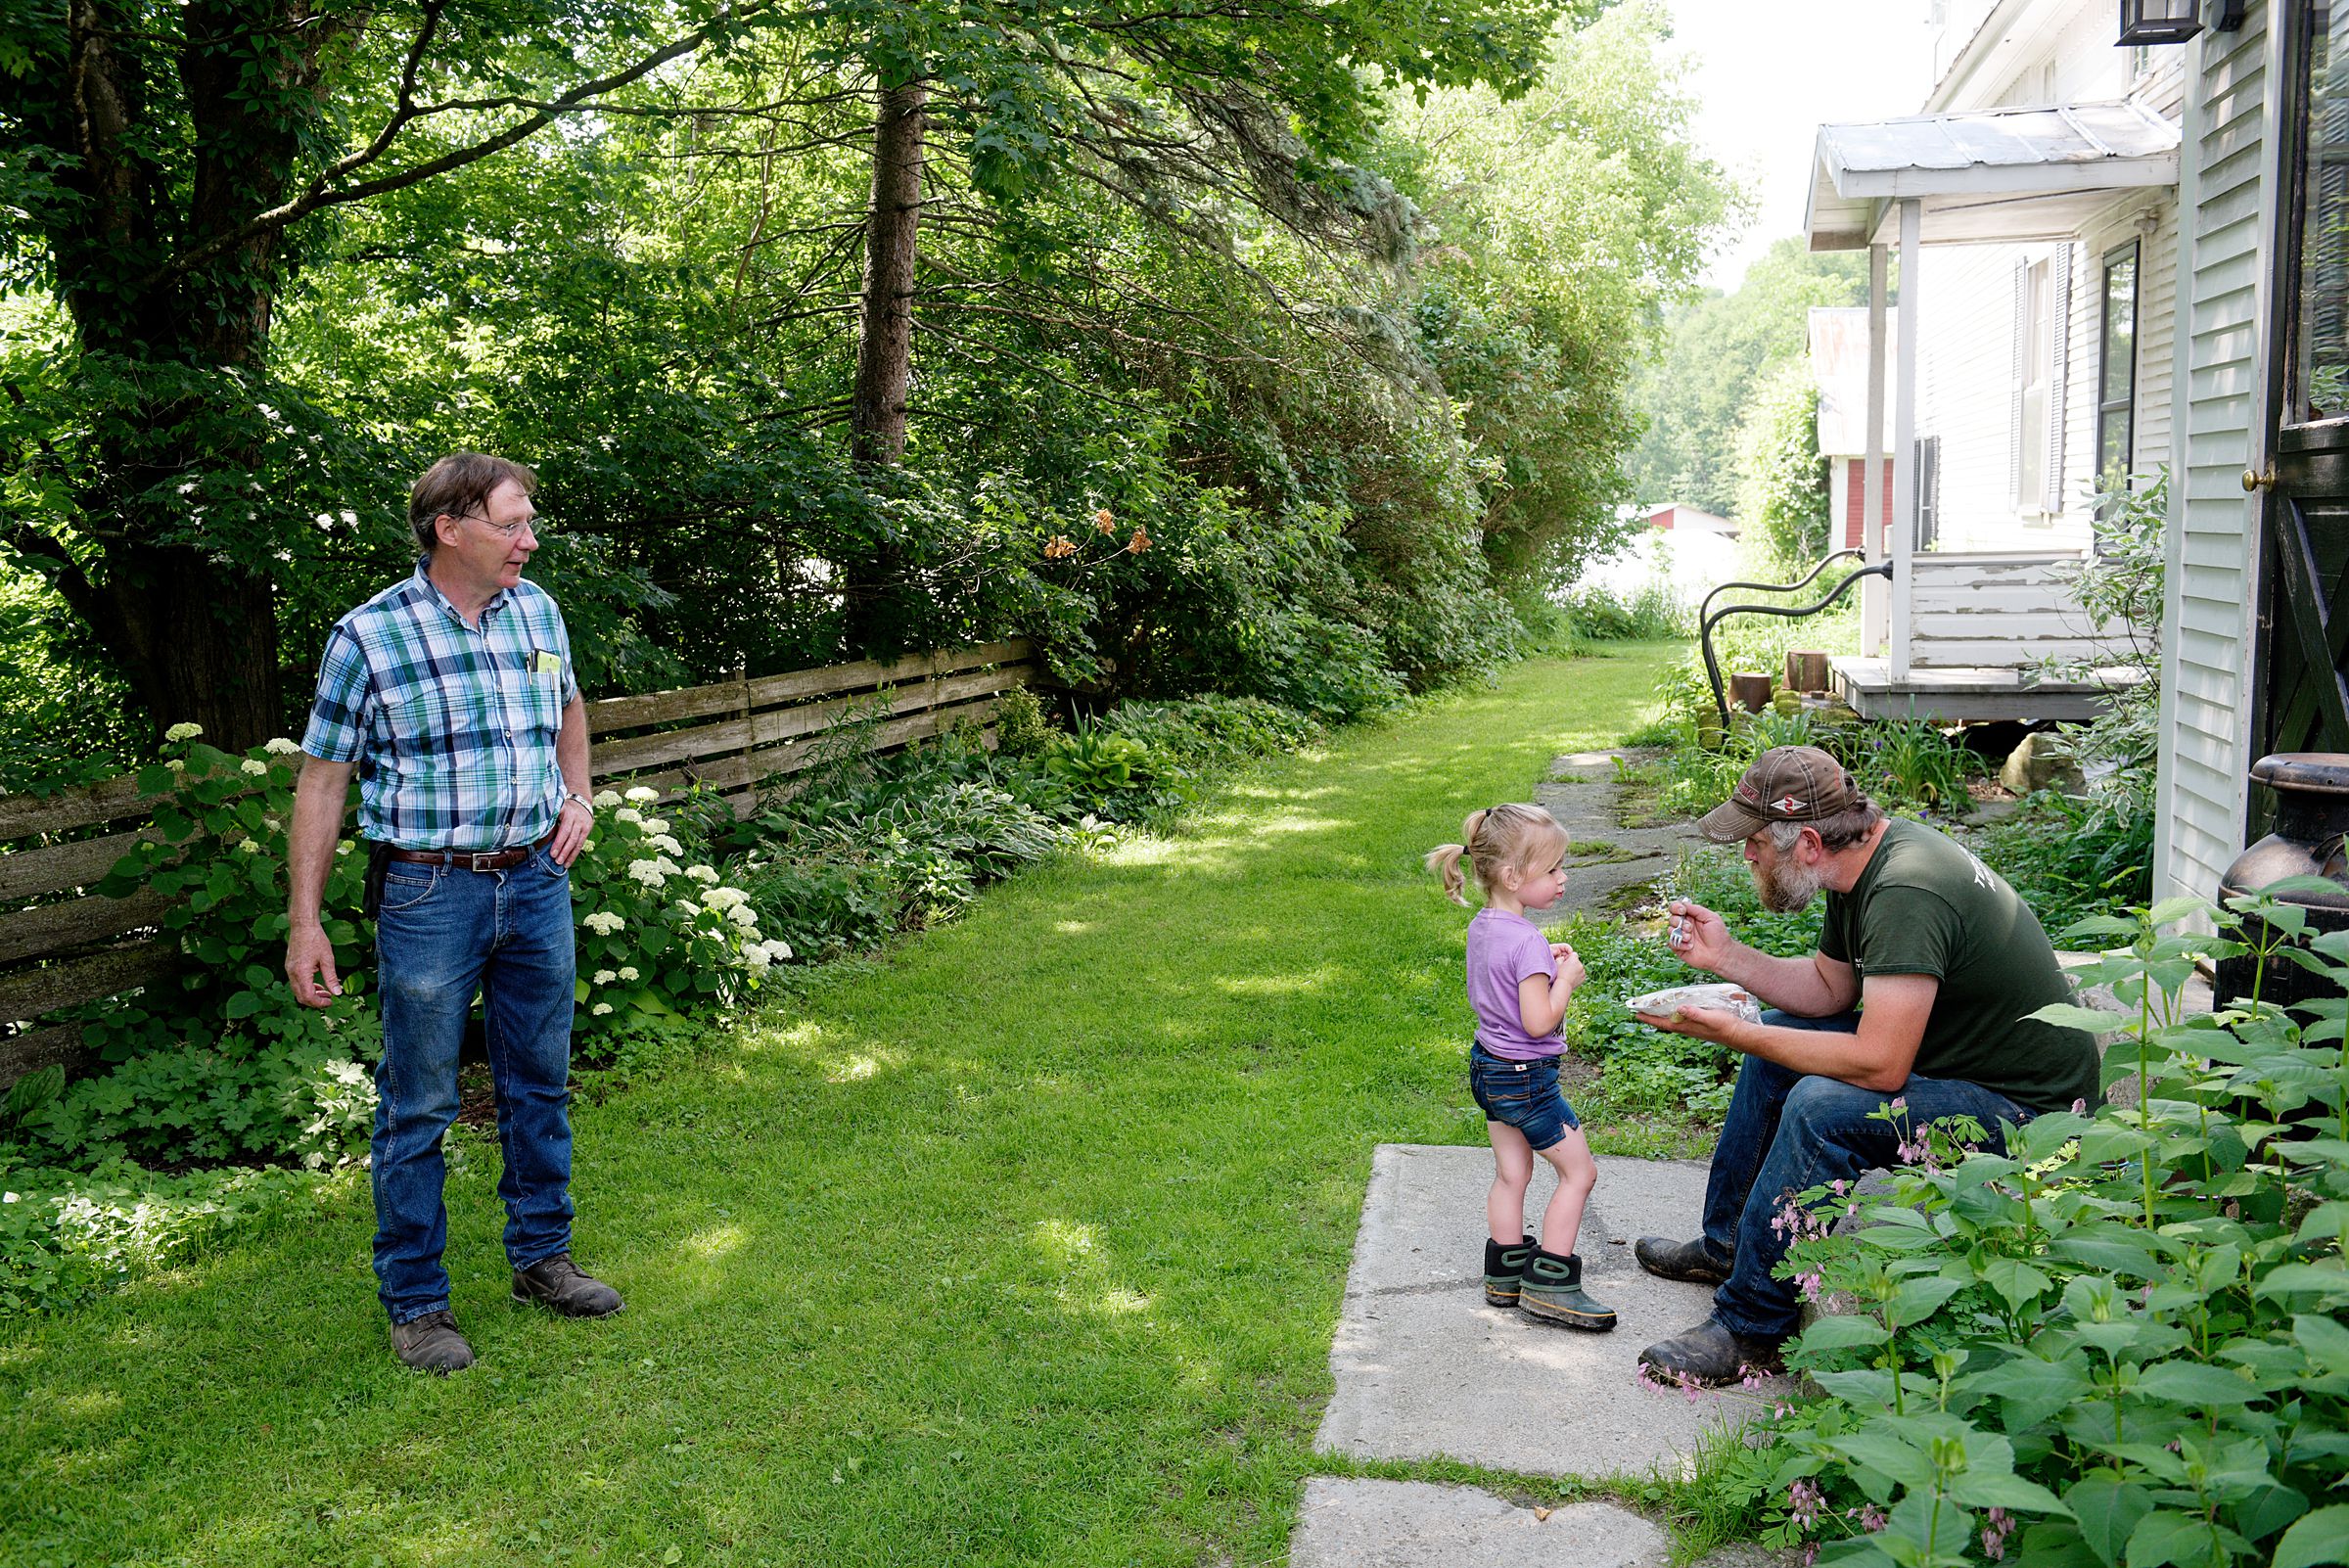 IBA dealer John Kerr, left, talks with farmer Dave Kennett, and his daughter Cecilia, 3, of Liberty Hill Farm in Rochester, Vt., before continuing his route Wednesday, July 3, 2019. (Valley News - James M. Patterson) Copyright Valley News. May not be reprinted or used online without permission. Send requests to permission@vnews.com.